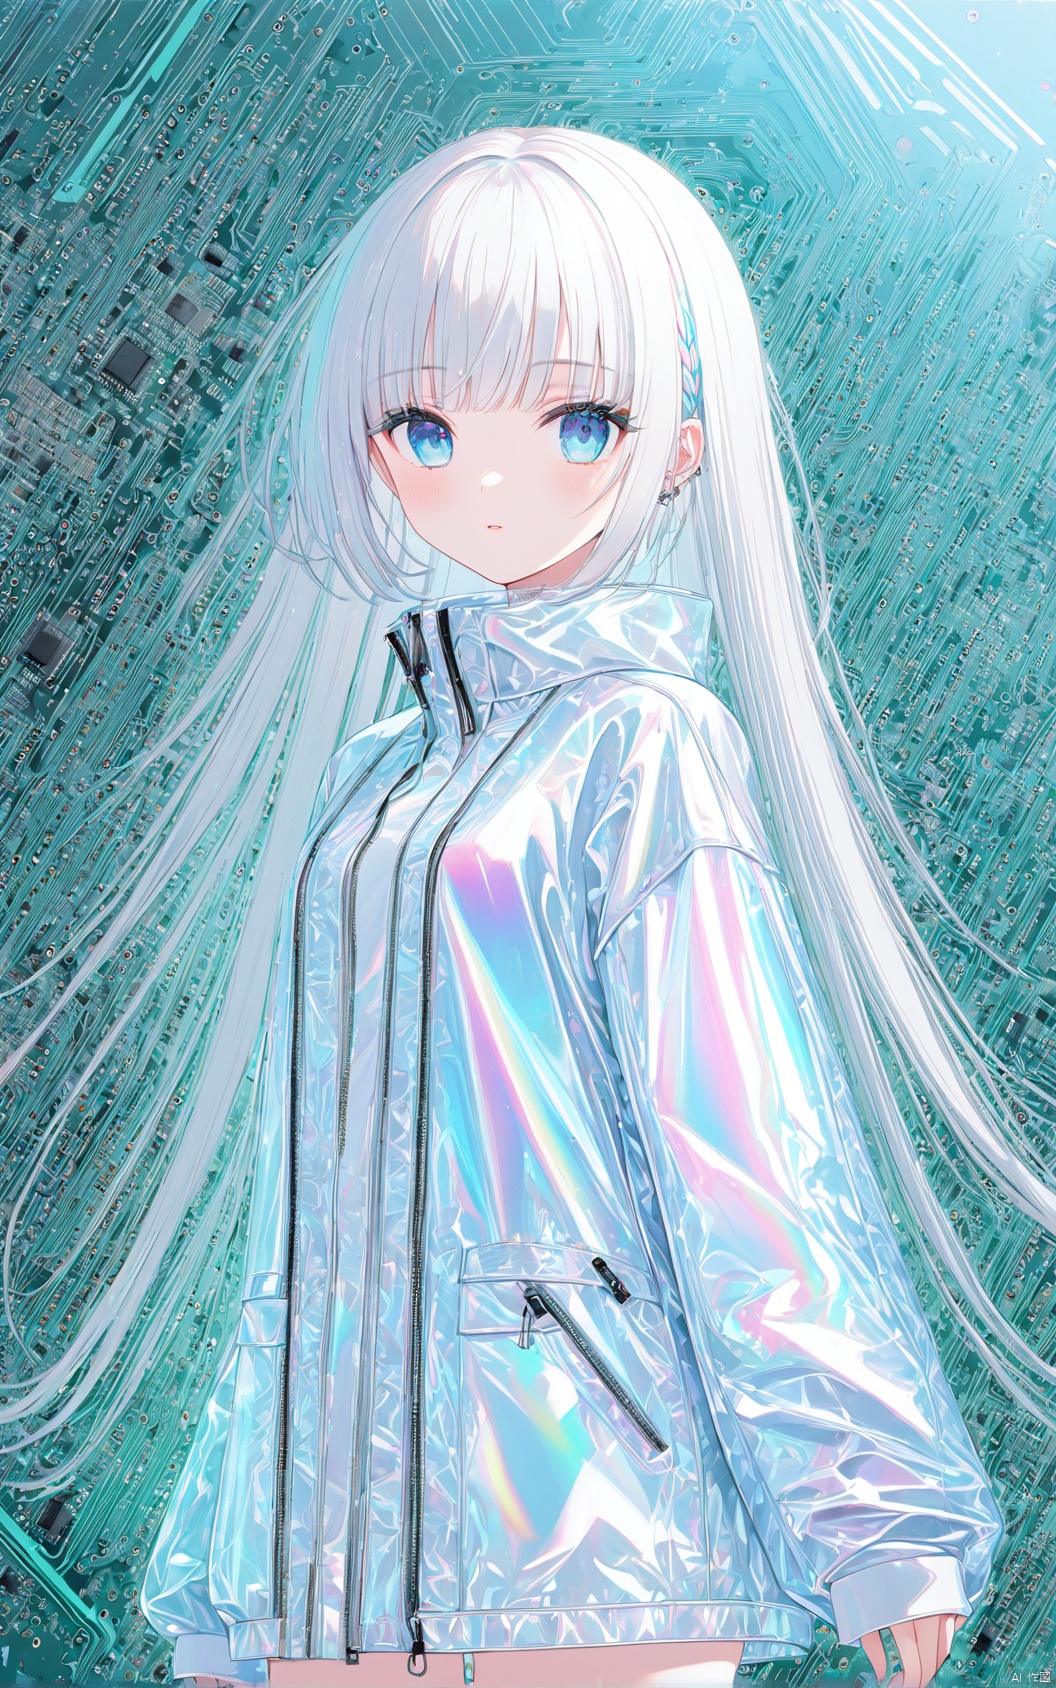  (masterpiece), (best quality),Best quality,masterpiece,transparent color PVC clothing,transparent color vinyl clothing,prismatic,holographic,chromatic aberration,fashion illustration,masterpiece,girl with harajuku fashion,long white hair, blue eyes, looking at viewer,8k,ultra detailed,pixiv,电路板Circuit board